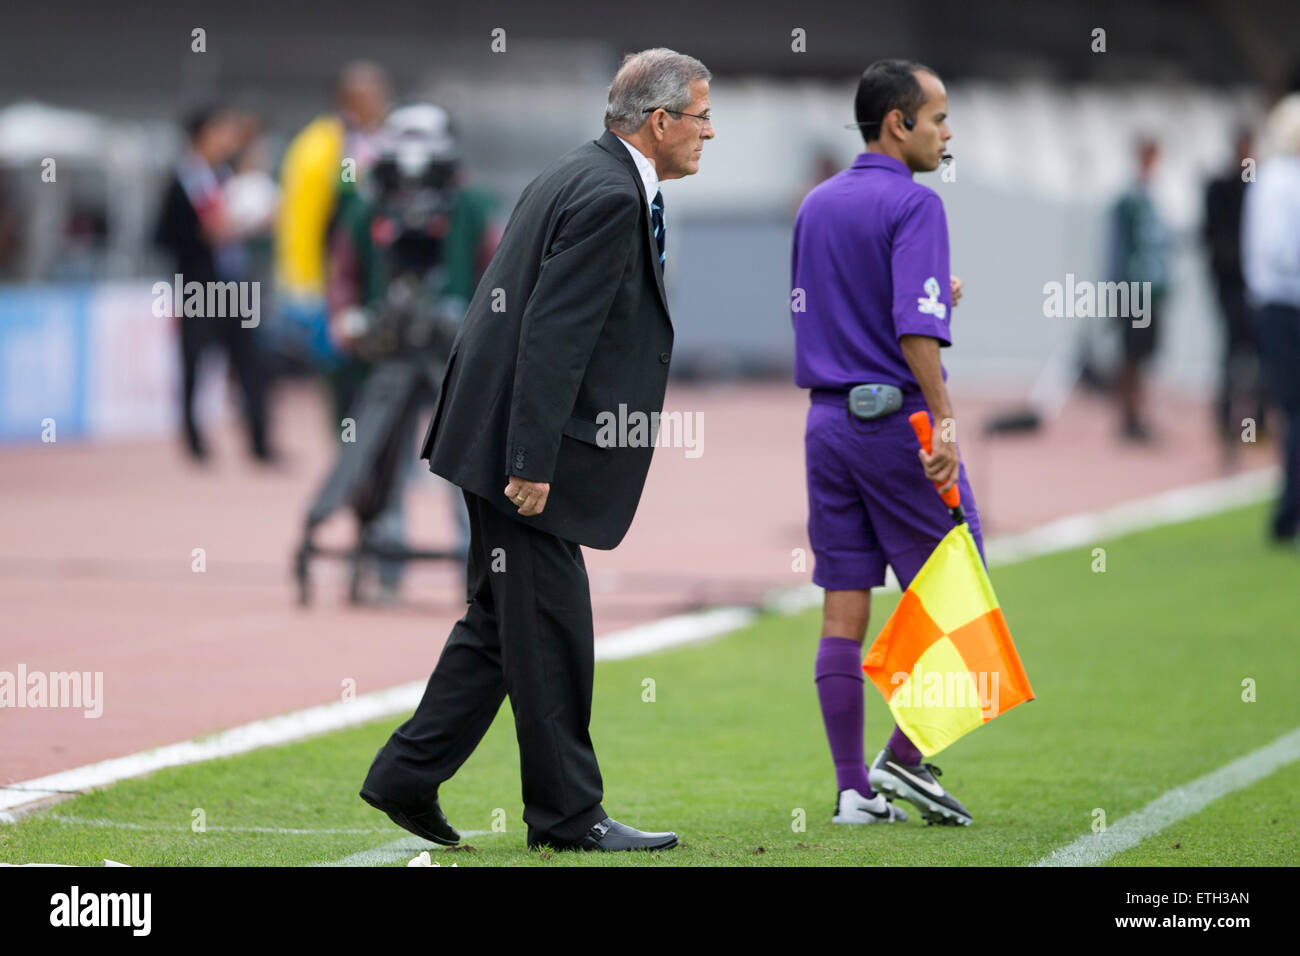 Antofagasta, Chile. 13th June, 2015. Oscar Tabarez (L), head coach of Uruguay, reacts during a Group B match between Uruguay and Jamaica at Copa America 2015, in Antofagasta, Chile, on June 13, 2015. Uruguay won 1-0. © Luis Echeverria/Xinhua/Alamy Live News Stock Photo